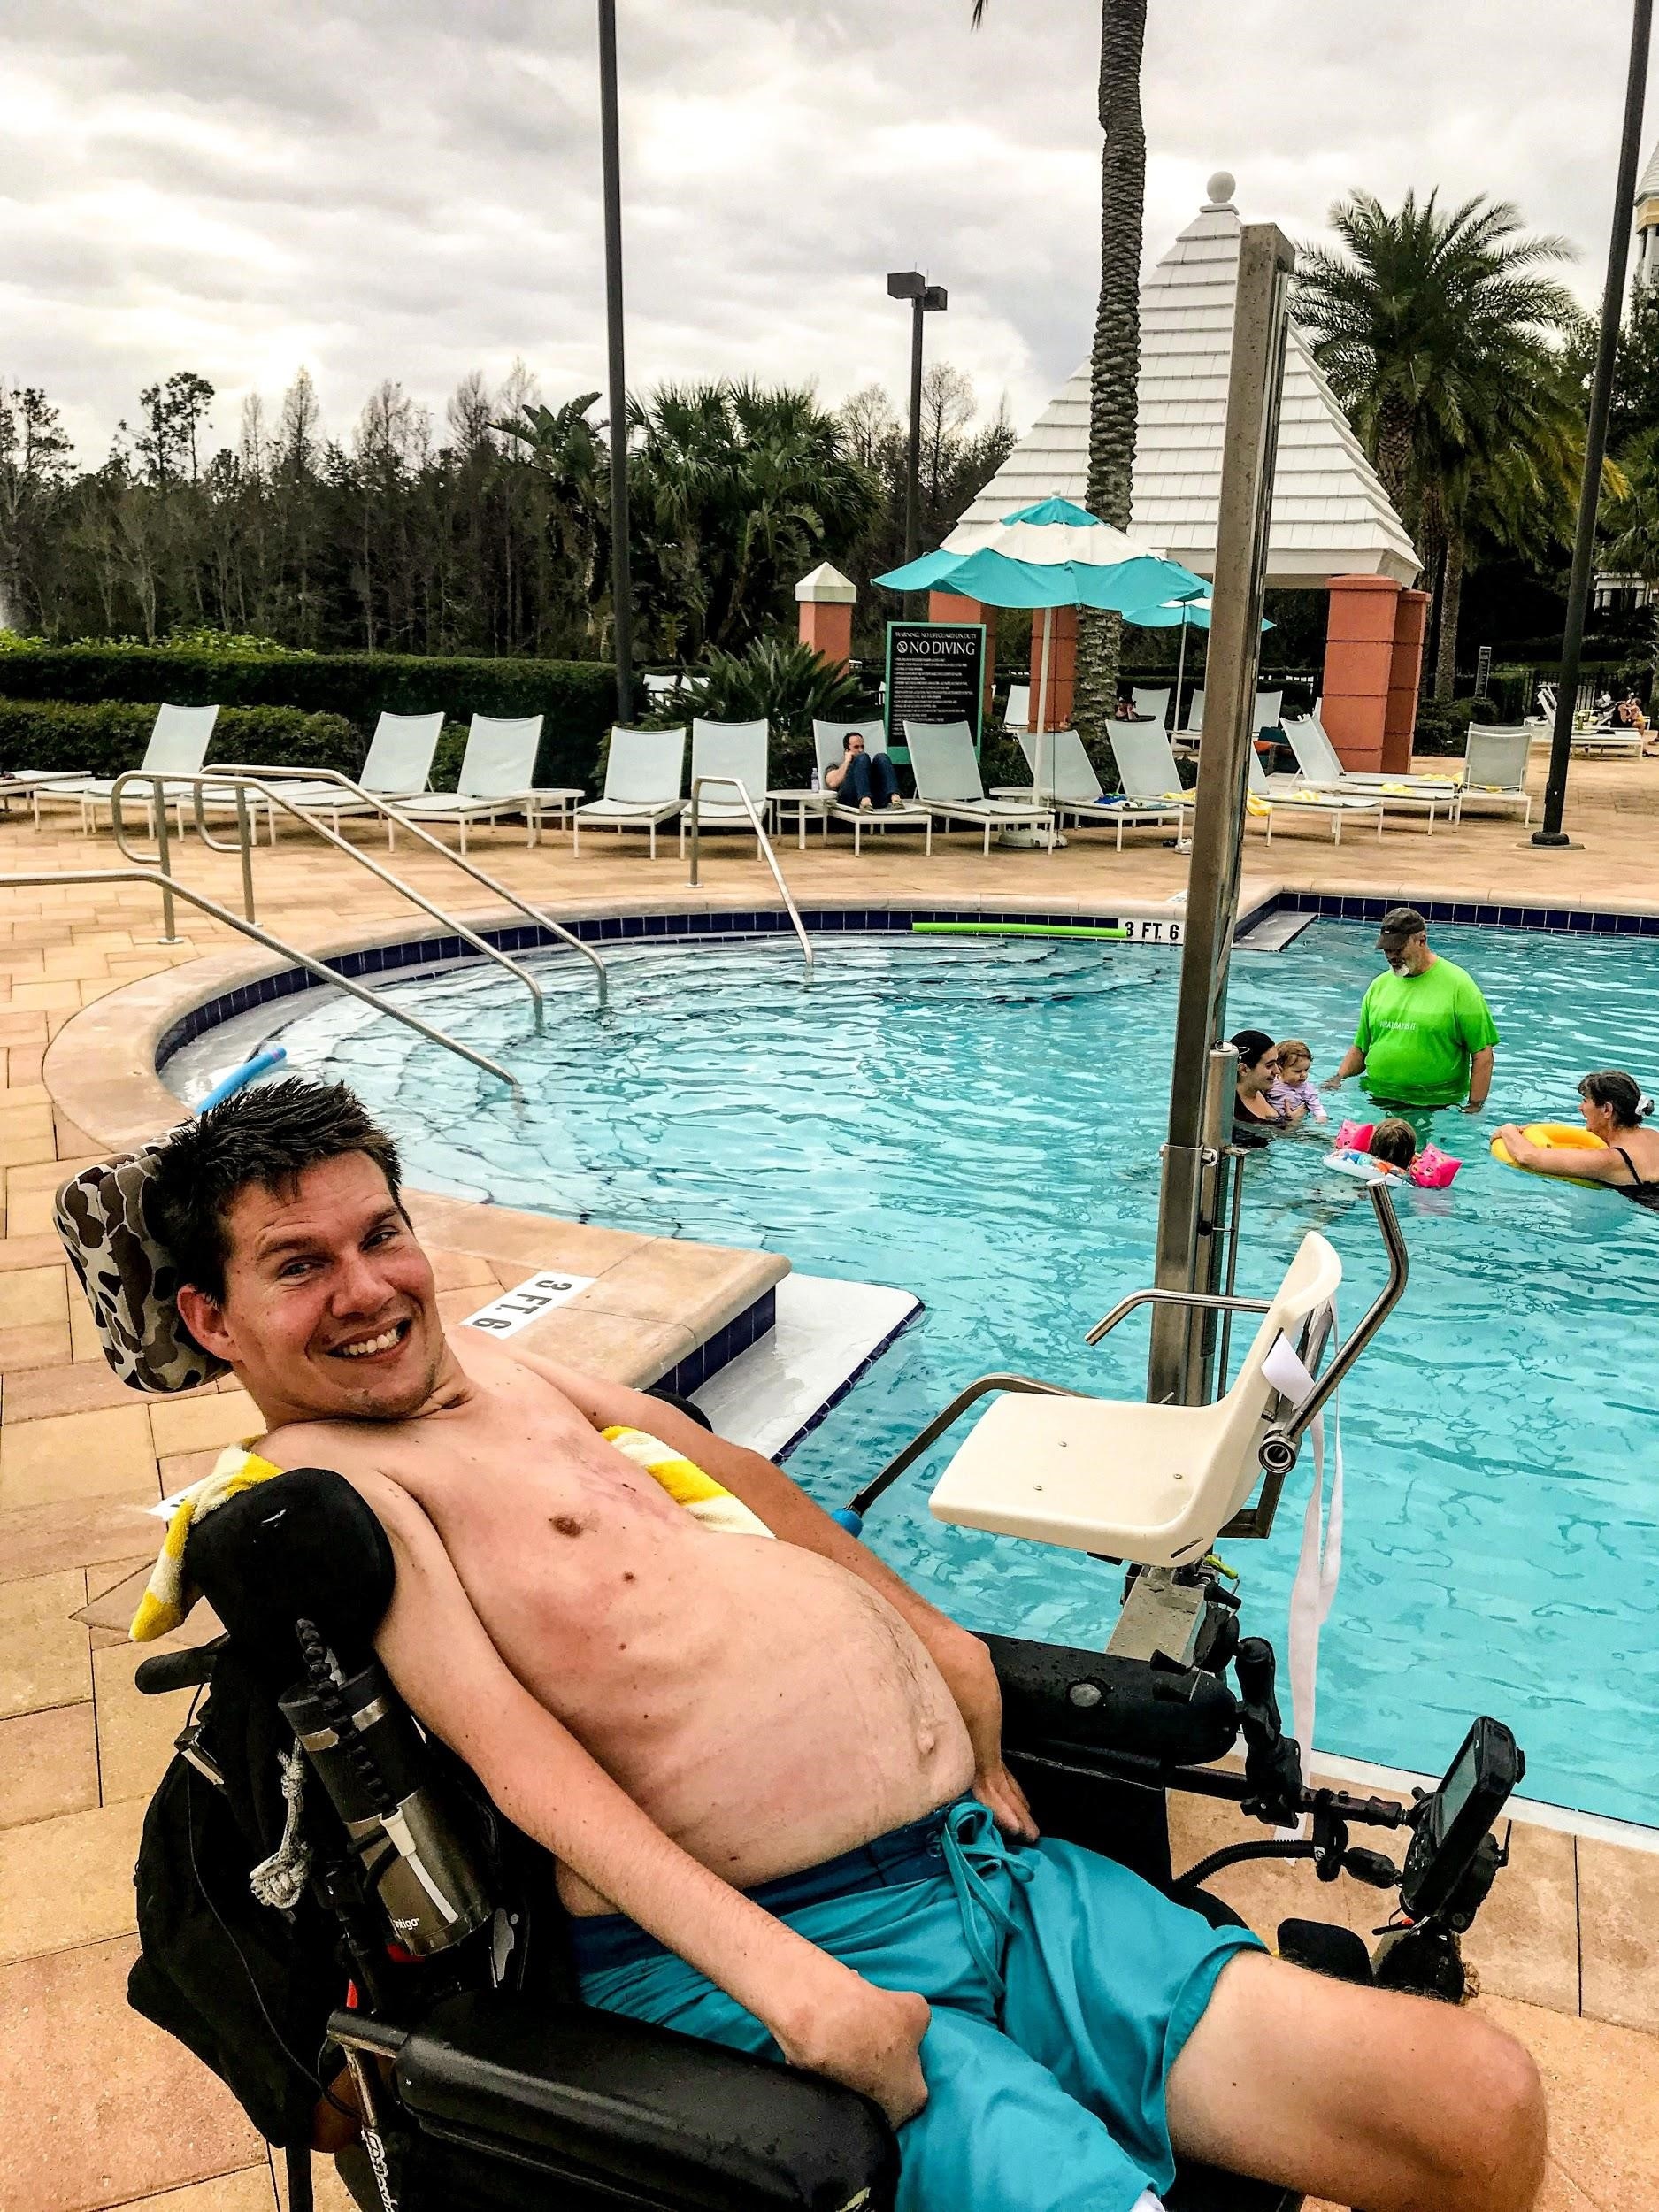 A Hilton Grand Vacations Owner in a wheel chair excited about the handicap pool lifts at the Hilton Grand Vacations at SeaWorld resort pool. 